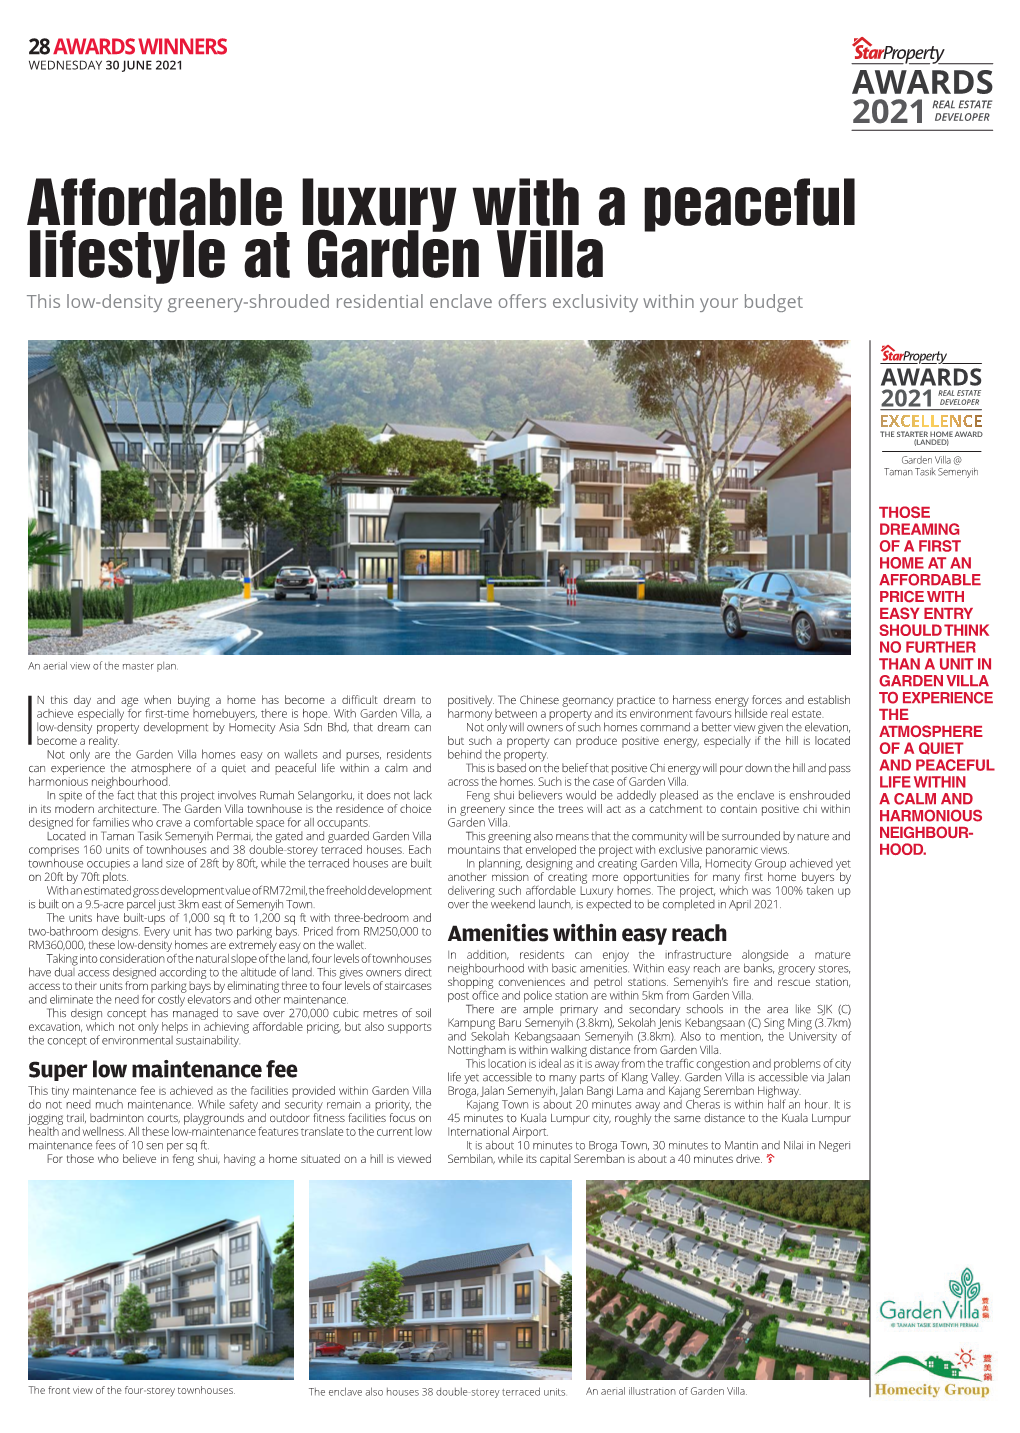 Affordable Luxury with a Peaceful Lifestyle at Garden Villa This Low-Density Greenery-Shrouded Residential Enclave Offers Exclusivity Within Your Budget